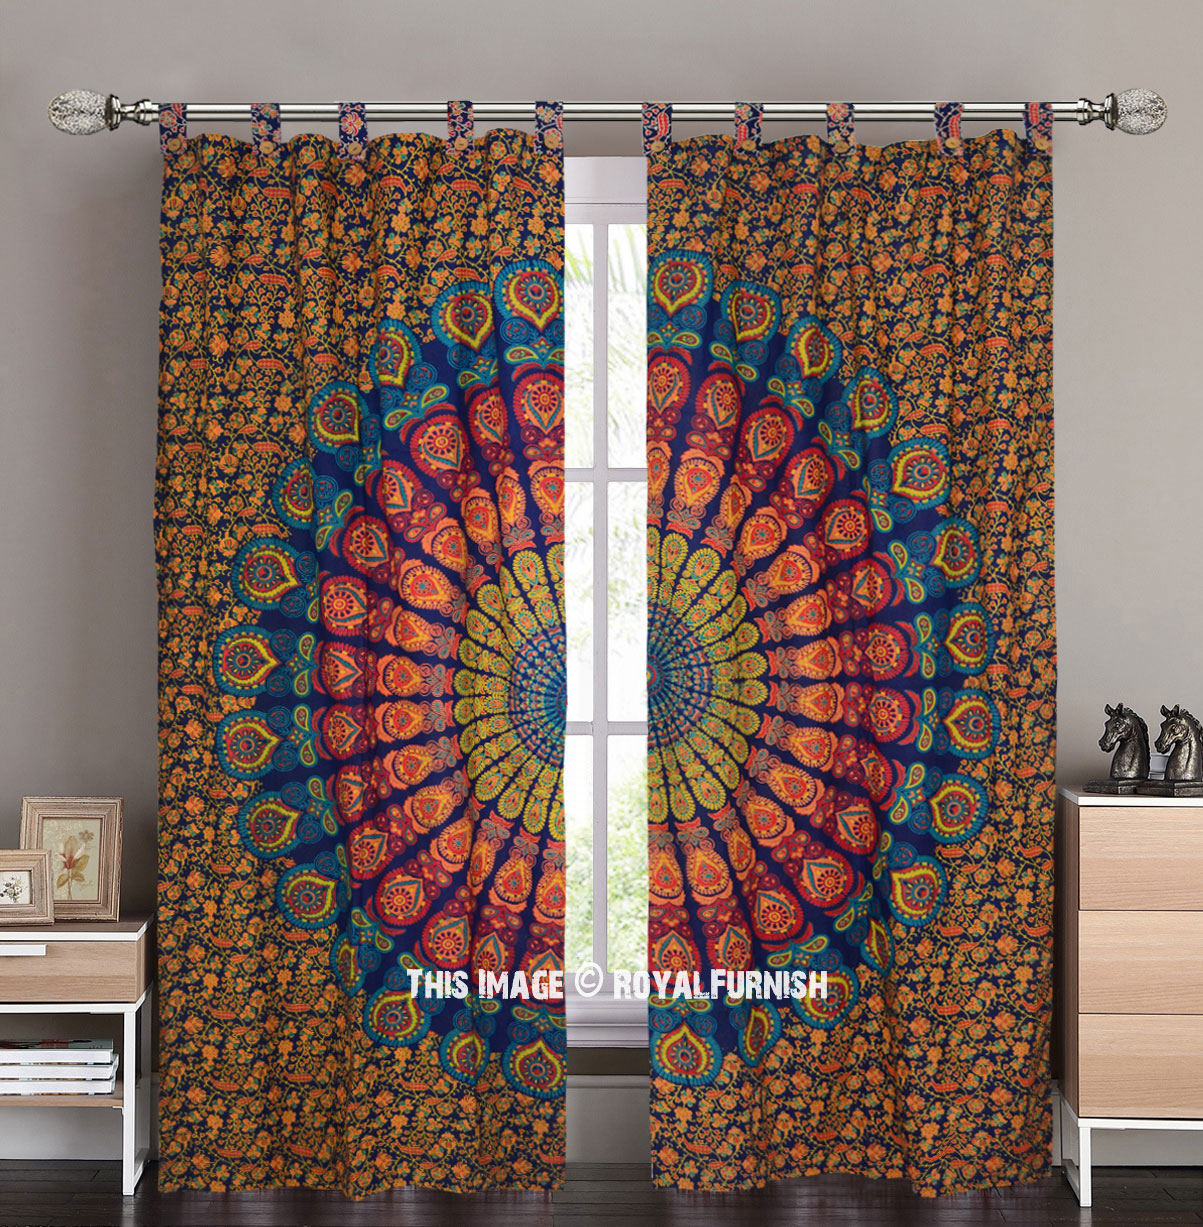 Tree of Life Curtains Mandala Curtains TWIN QUEEN Size Bohemian Curtain Window Curtains Indian Curtains Door Curtains Hippie Curtain